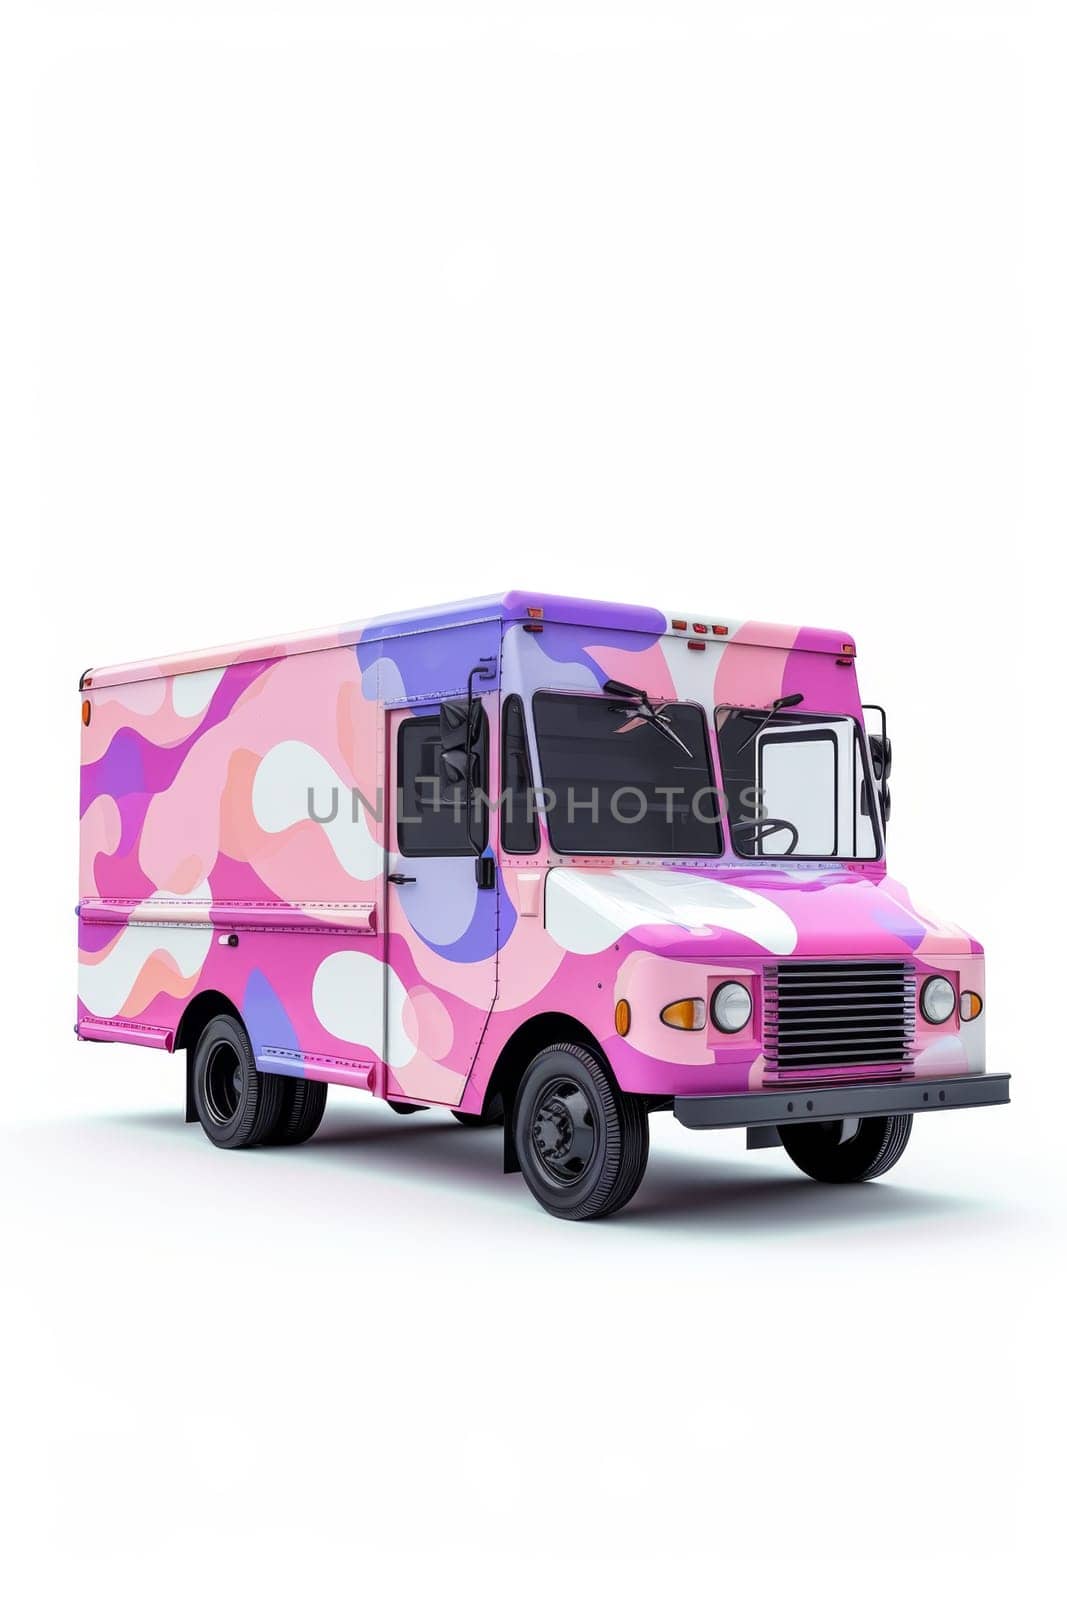 A modern pink van on a white background. 3D illustration by Lobachad